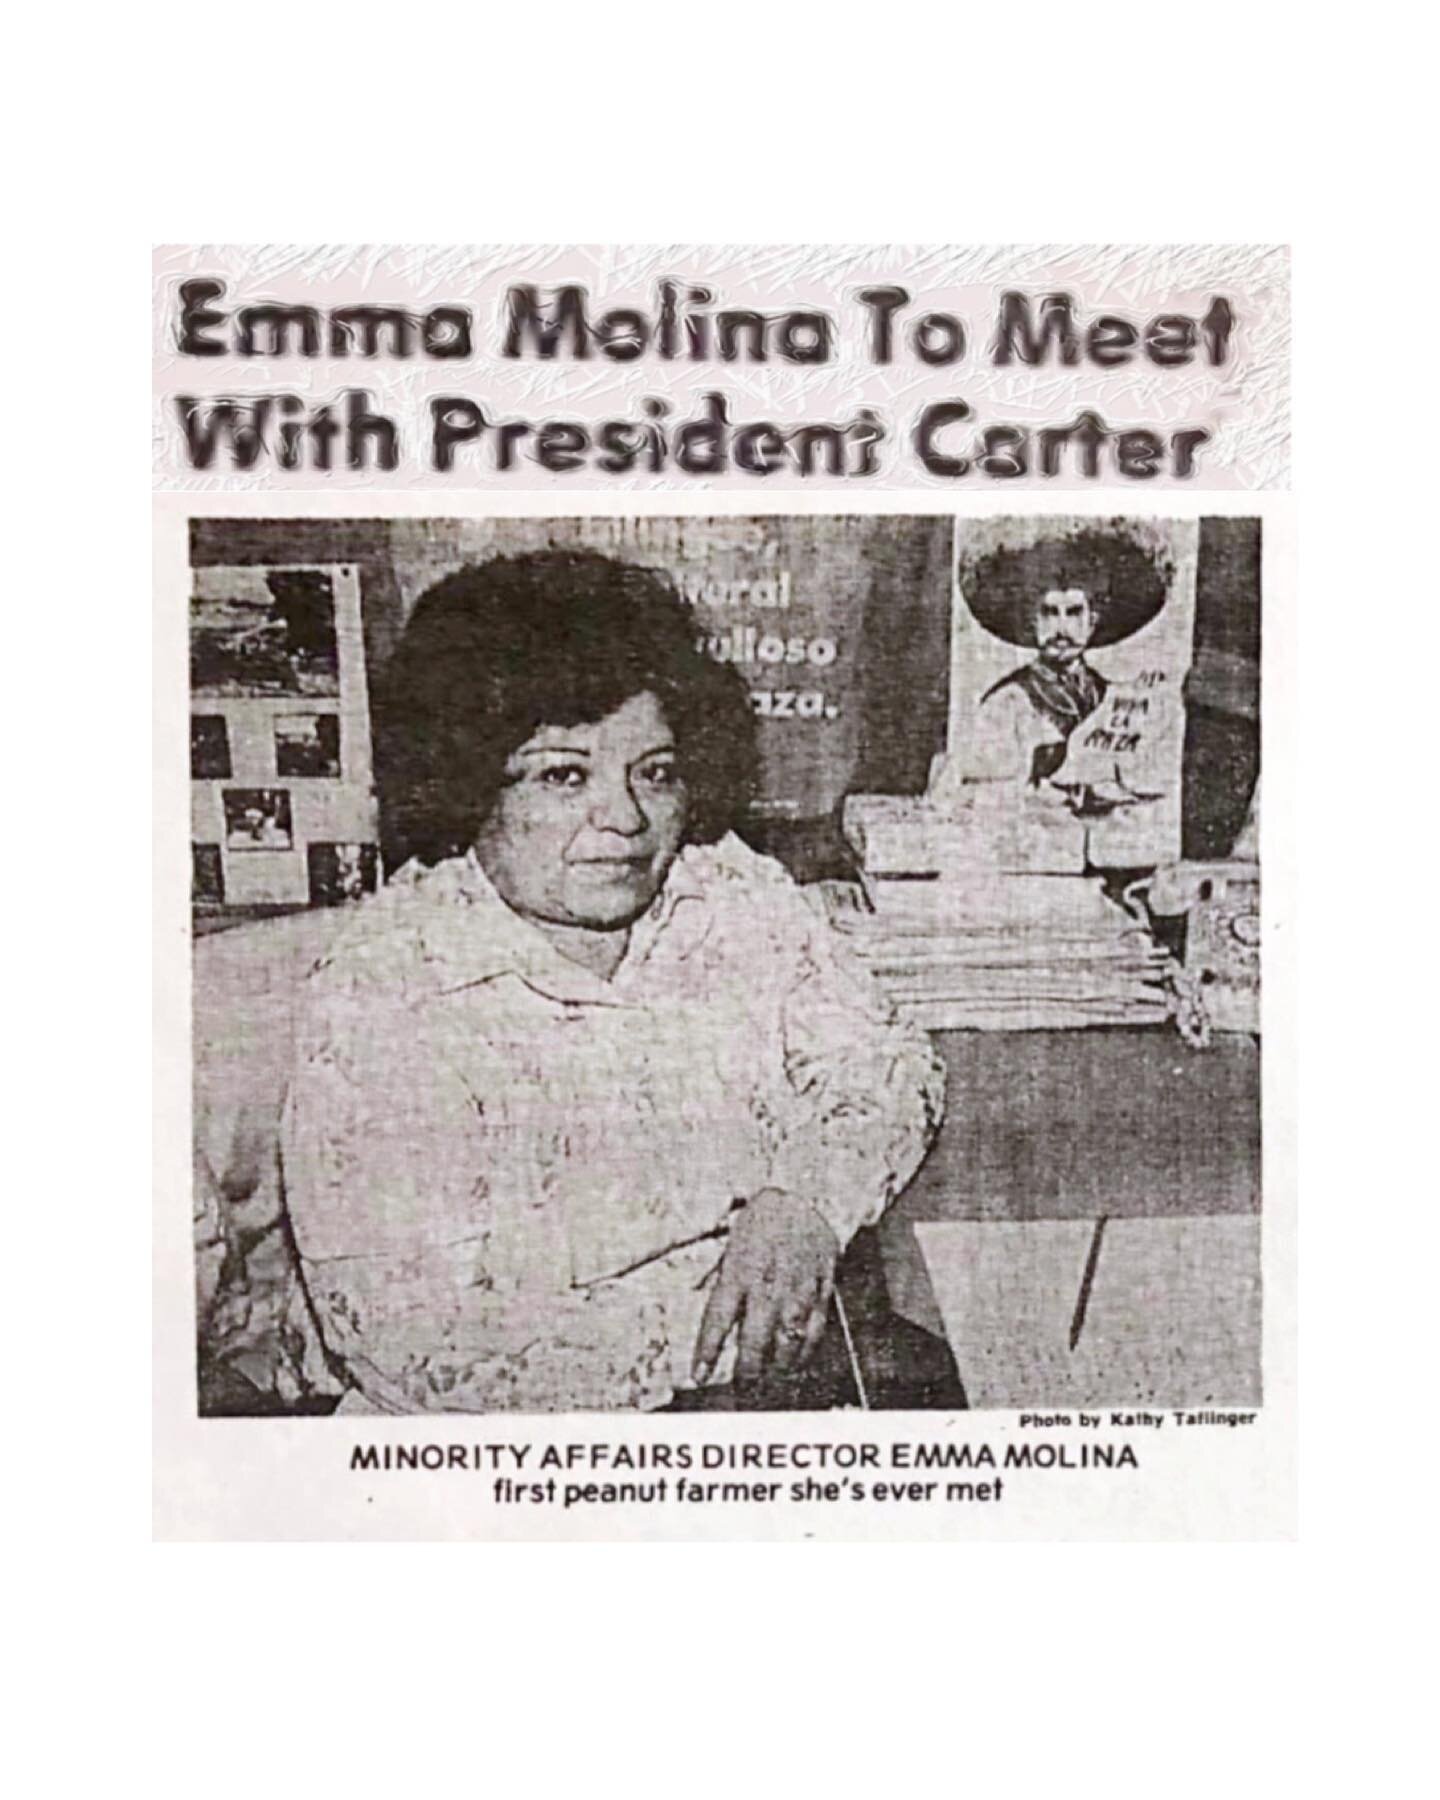 My cousin posted some very special newspaper clippings from when my Grandma Molina met with President Carter in 1977 to represent migrant worker concerns. I always knew this happened, but I was really inspired reading more about her &amp; the transcr